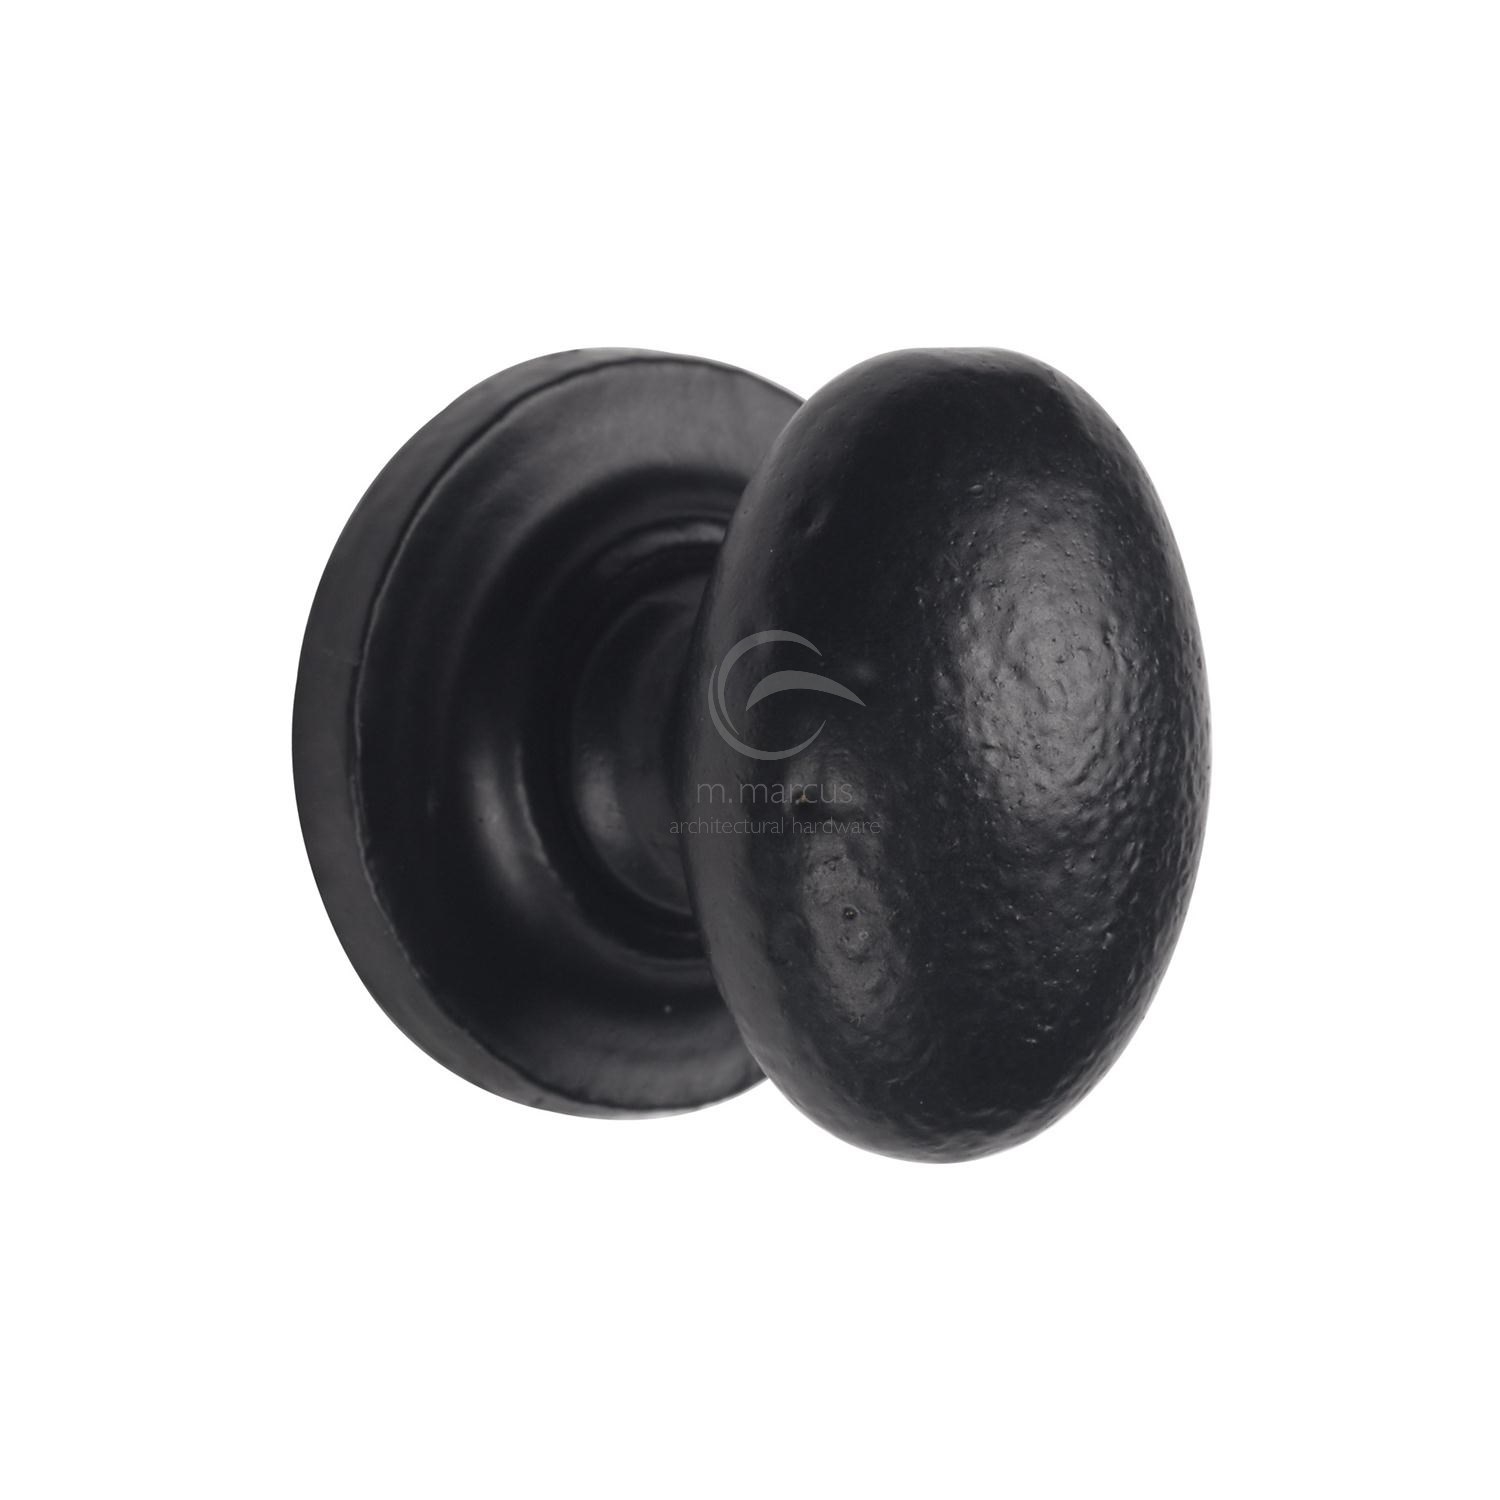 Black Iron Rustic Cabinet Knob on Round Plate Oval Design 32mm